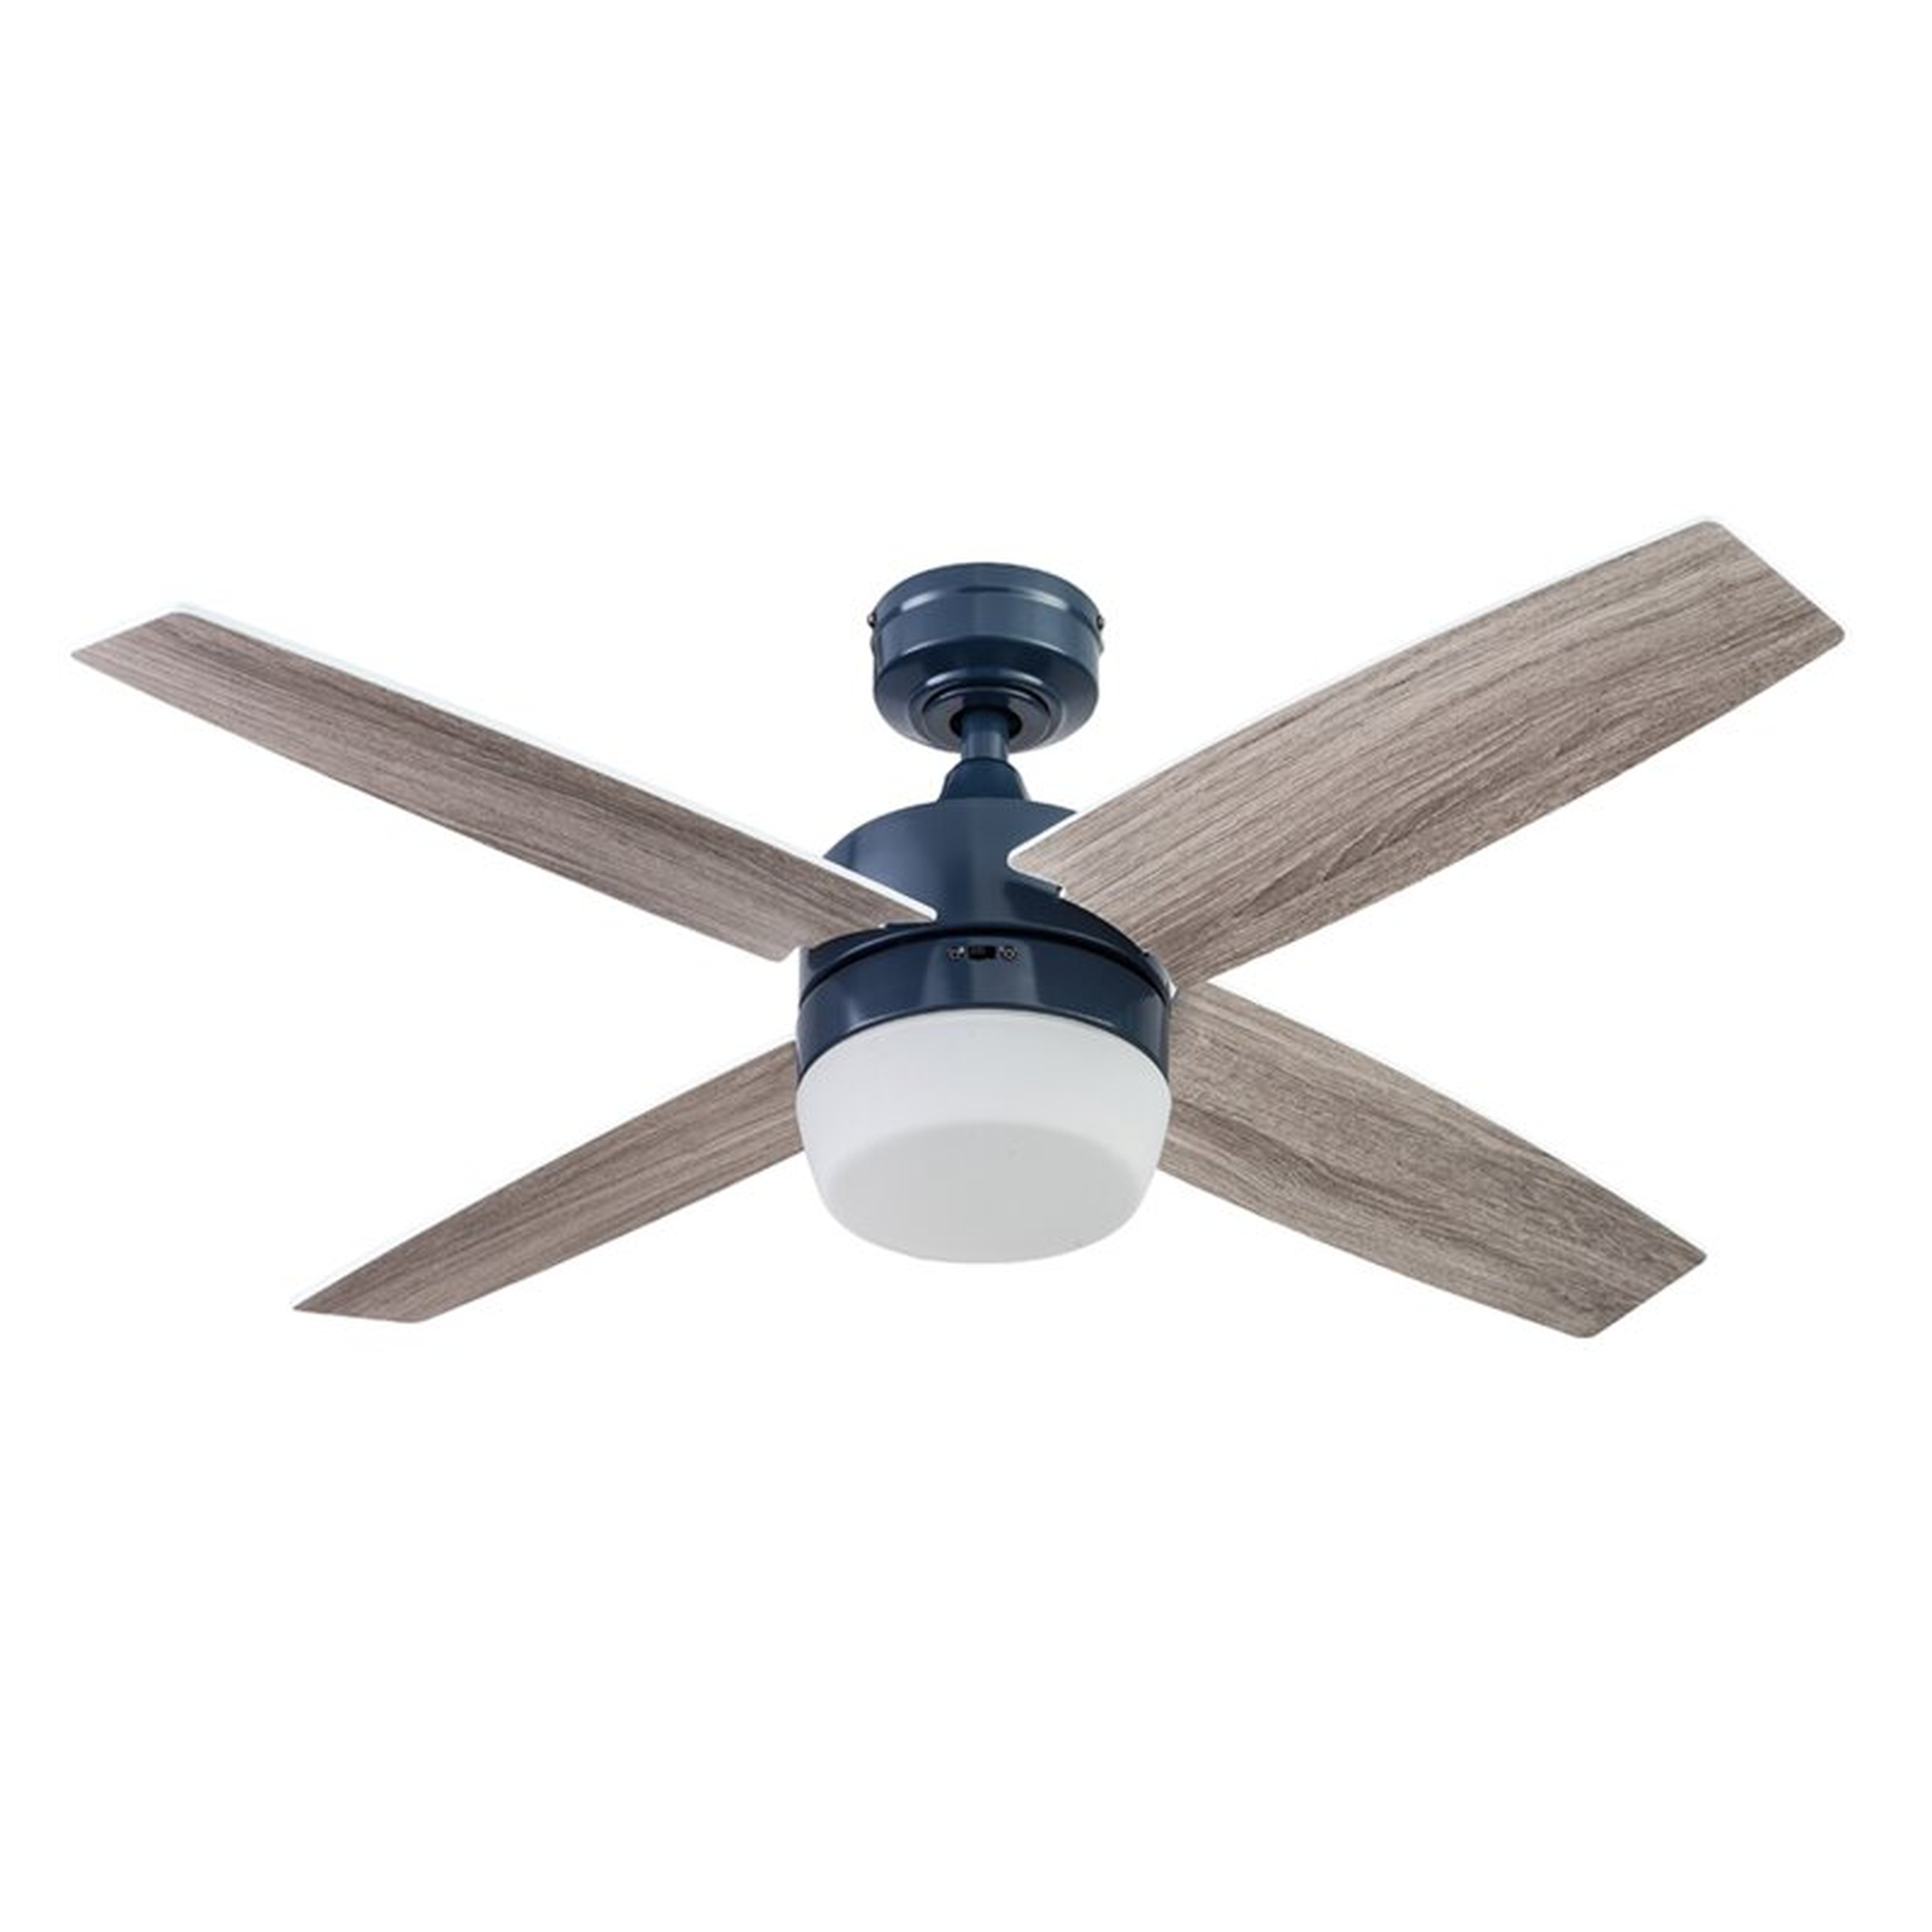 44'' Capps 4 - Blade LED Standard Ceiling Fan with Remote Control and Light Kit Included - Wayfair